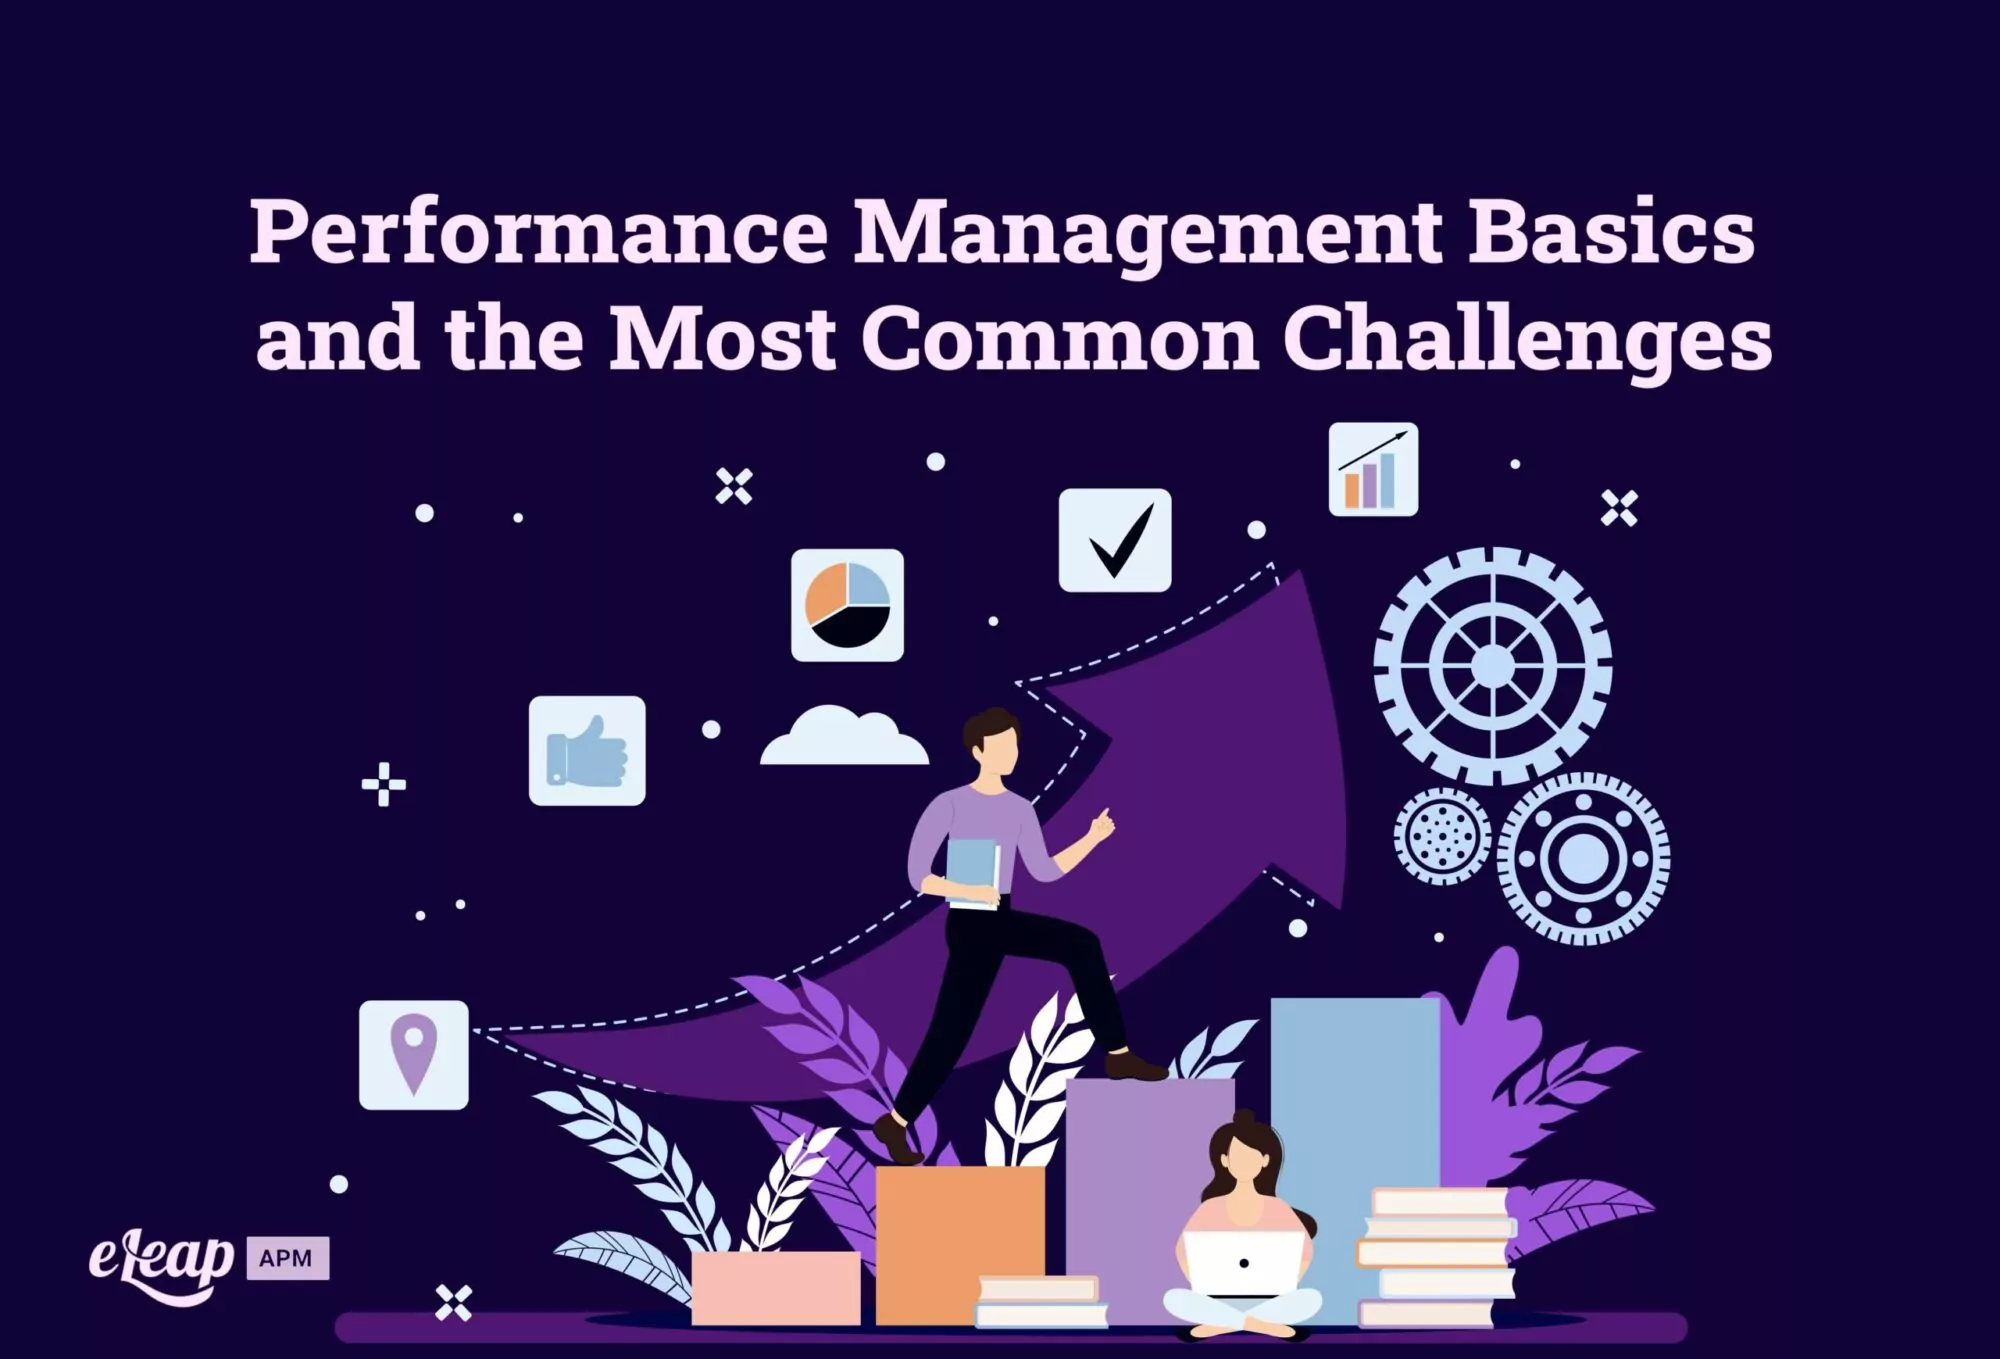 Performance Management Basics and the Most Common Challenges